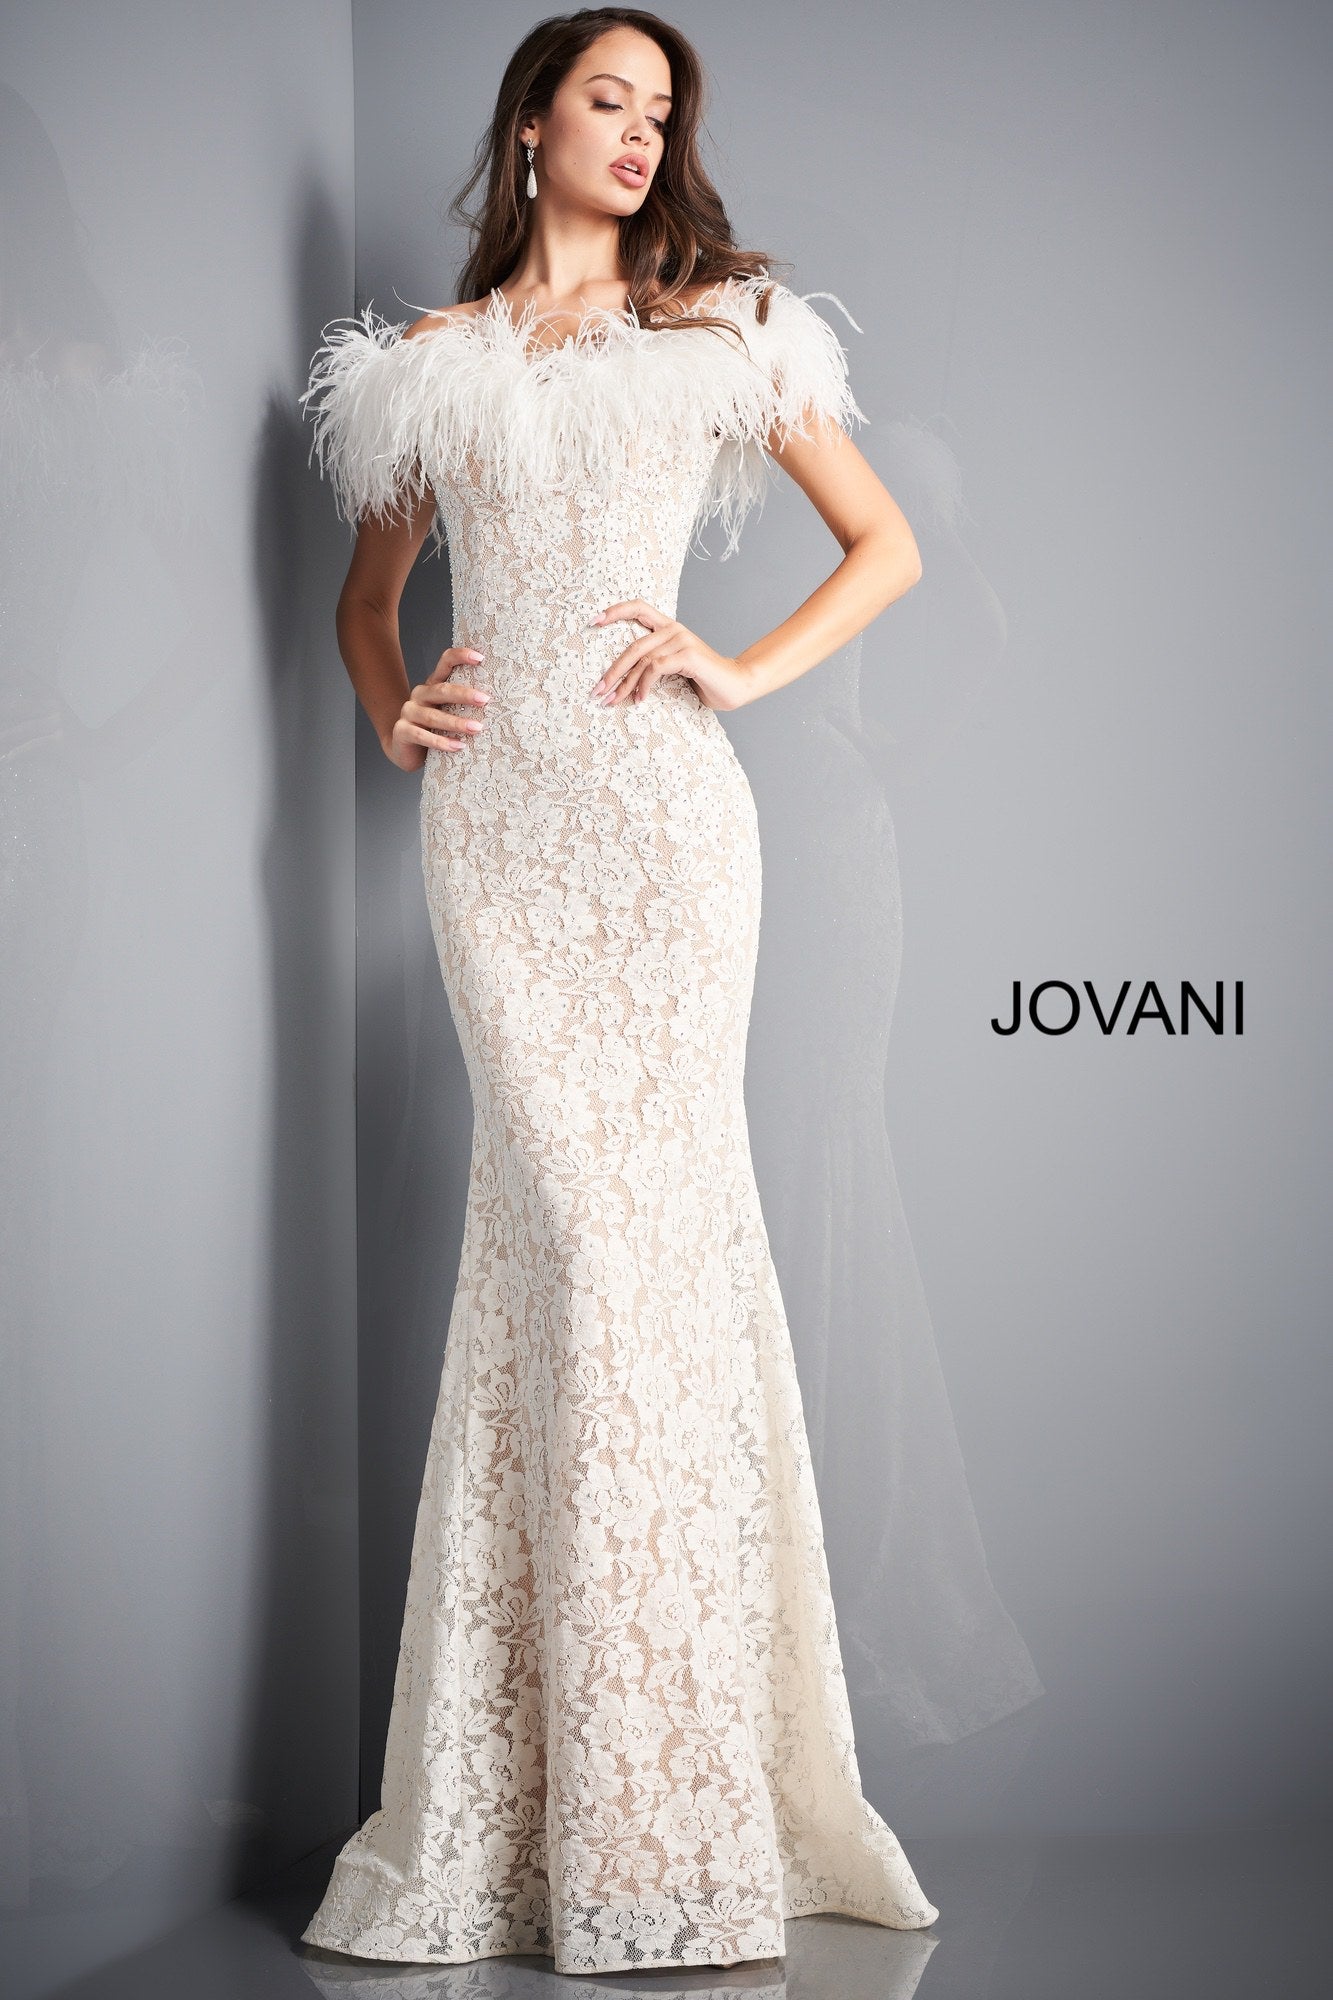 Jovani 06451 is a stunning long fitted lace formal evening gown. Lush Feather accented off the shoulder sleeves. Fit & Flare silhouette with a lush sweeping train with horse hair trim. Fully embellished with scattered crystal rhinestones. sweeping train. Wedding reception dress. prom dress. pageant gown. Available Sizes: 00,0,2,4,6,8,10,12,14,16,18,20,22,24  Available Colors: BLACK, EMERALD, IVORY, LIGHT-BLUE, NAVY, RED